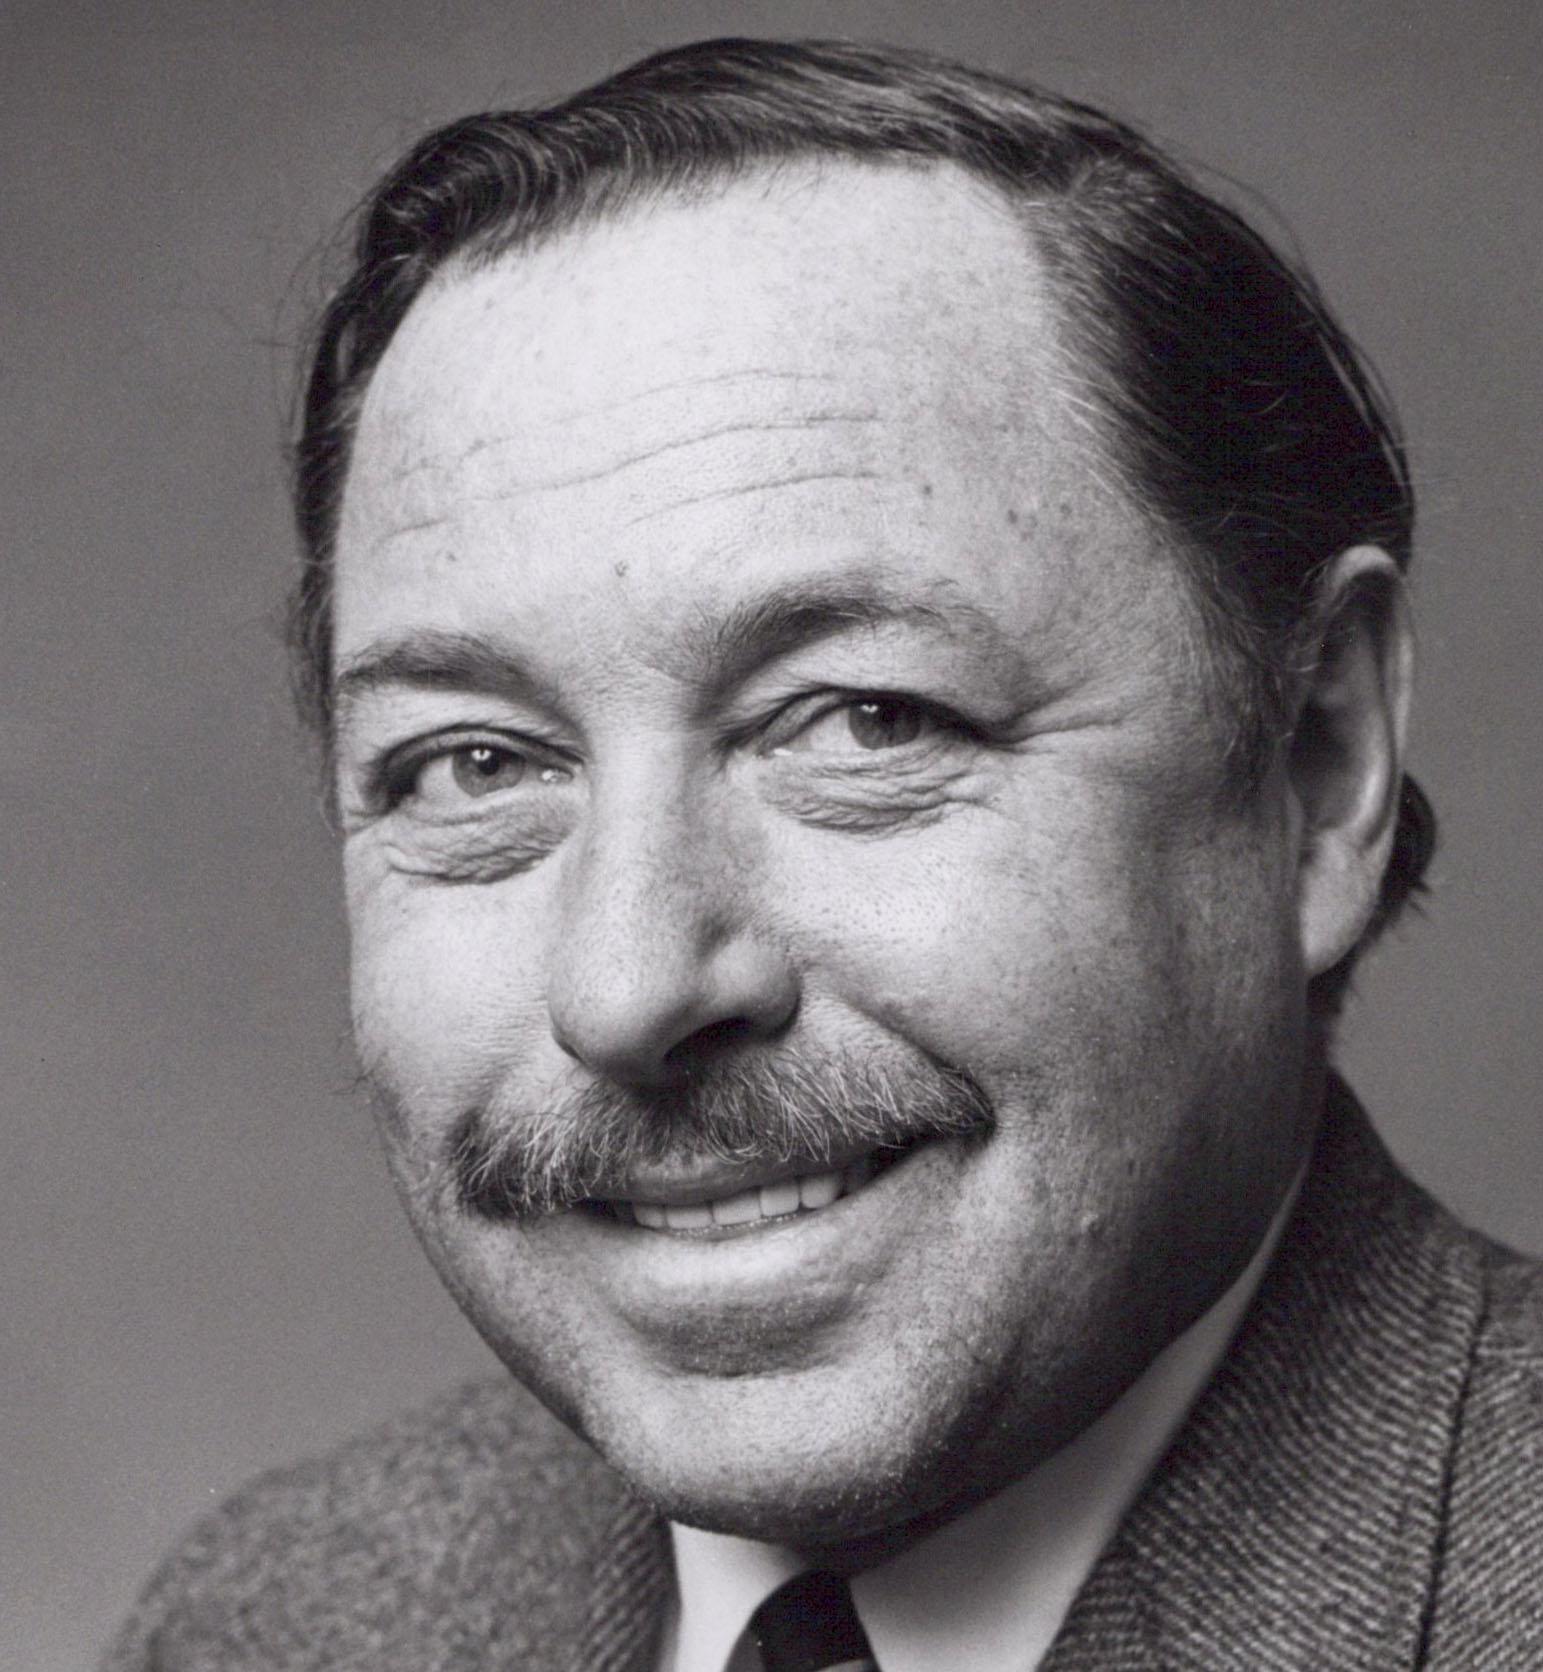 Pulitzer prize-winning playwright Tennessee Williams - Photograph by Jack Mitchell